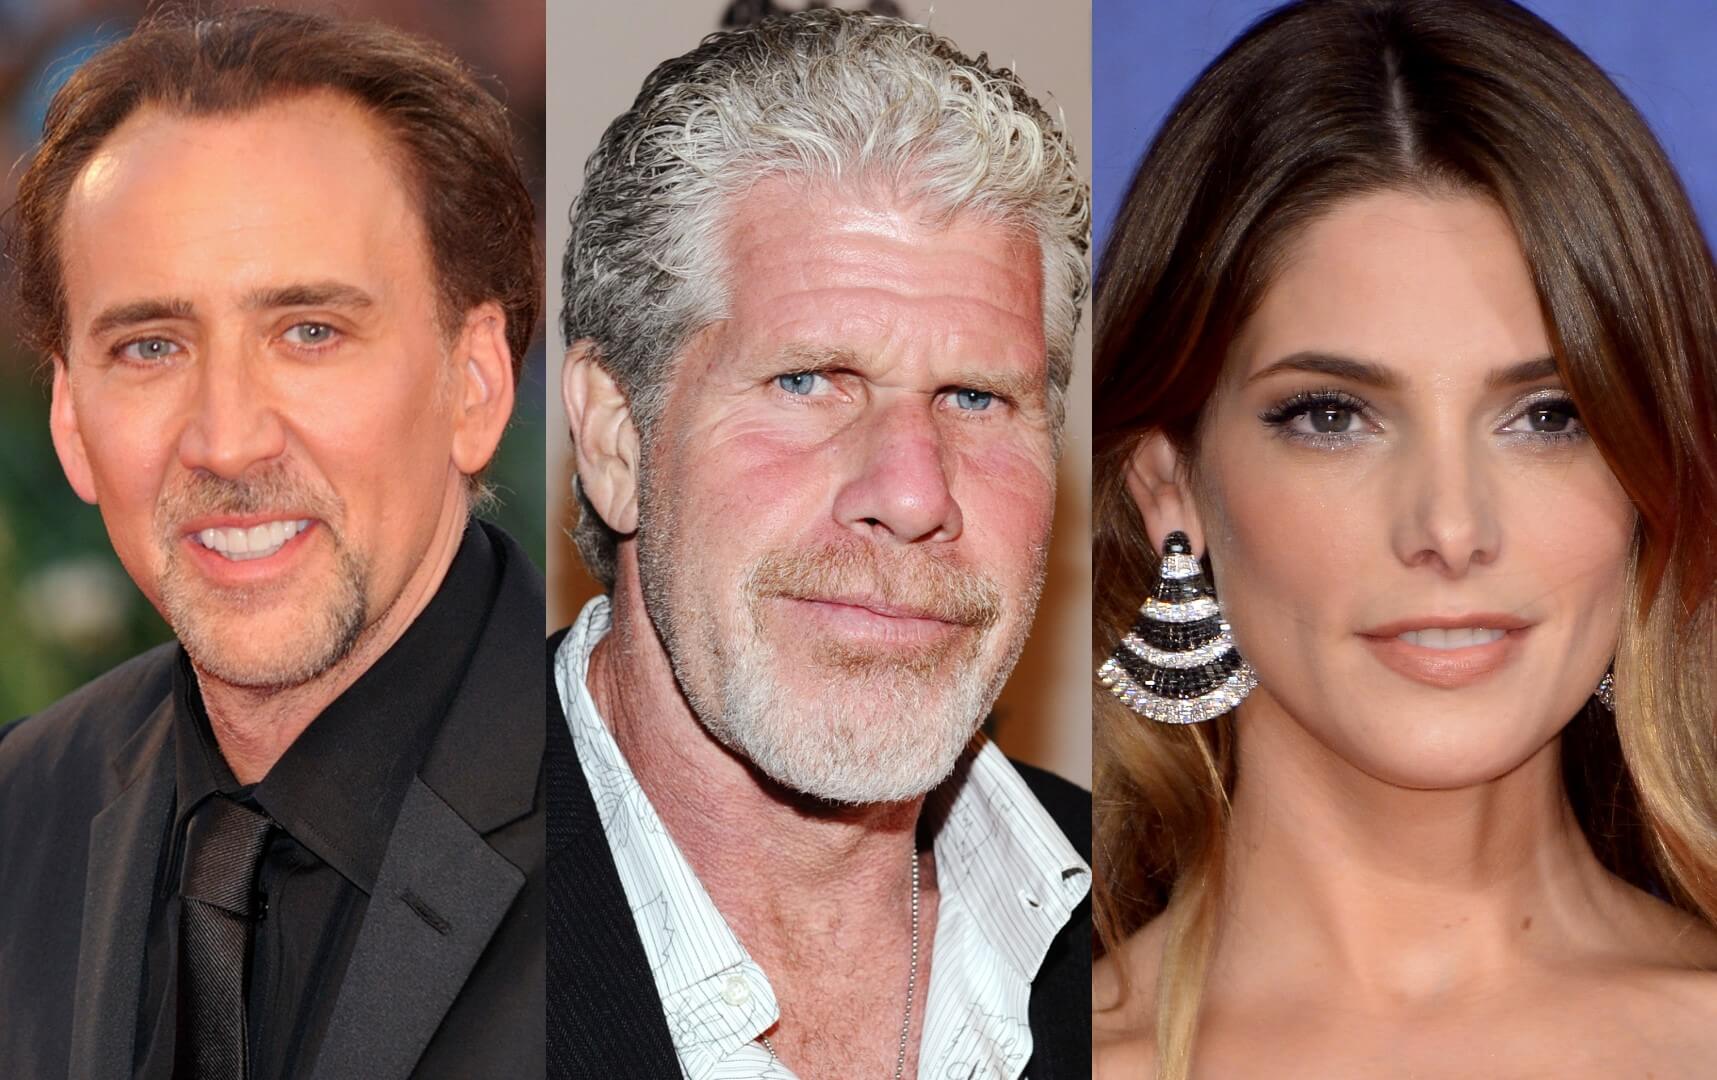 Nicolas Cage, Ron Perlman and Ashley Greene cast in action flick The Retirement Plan